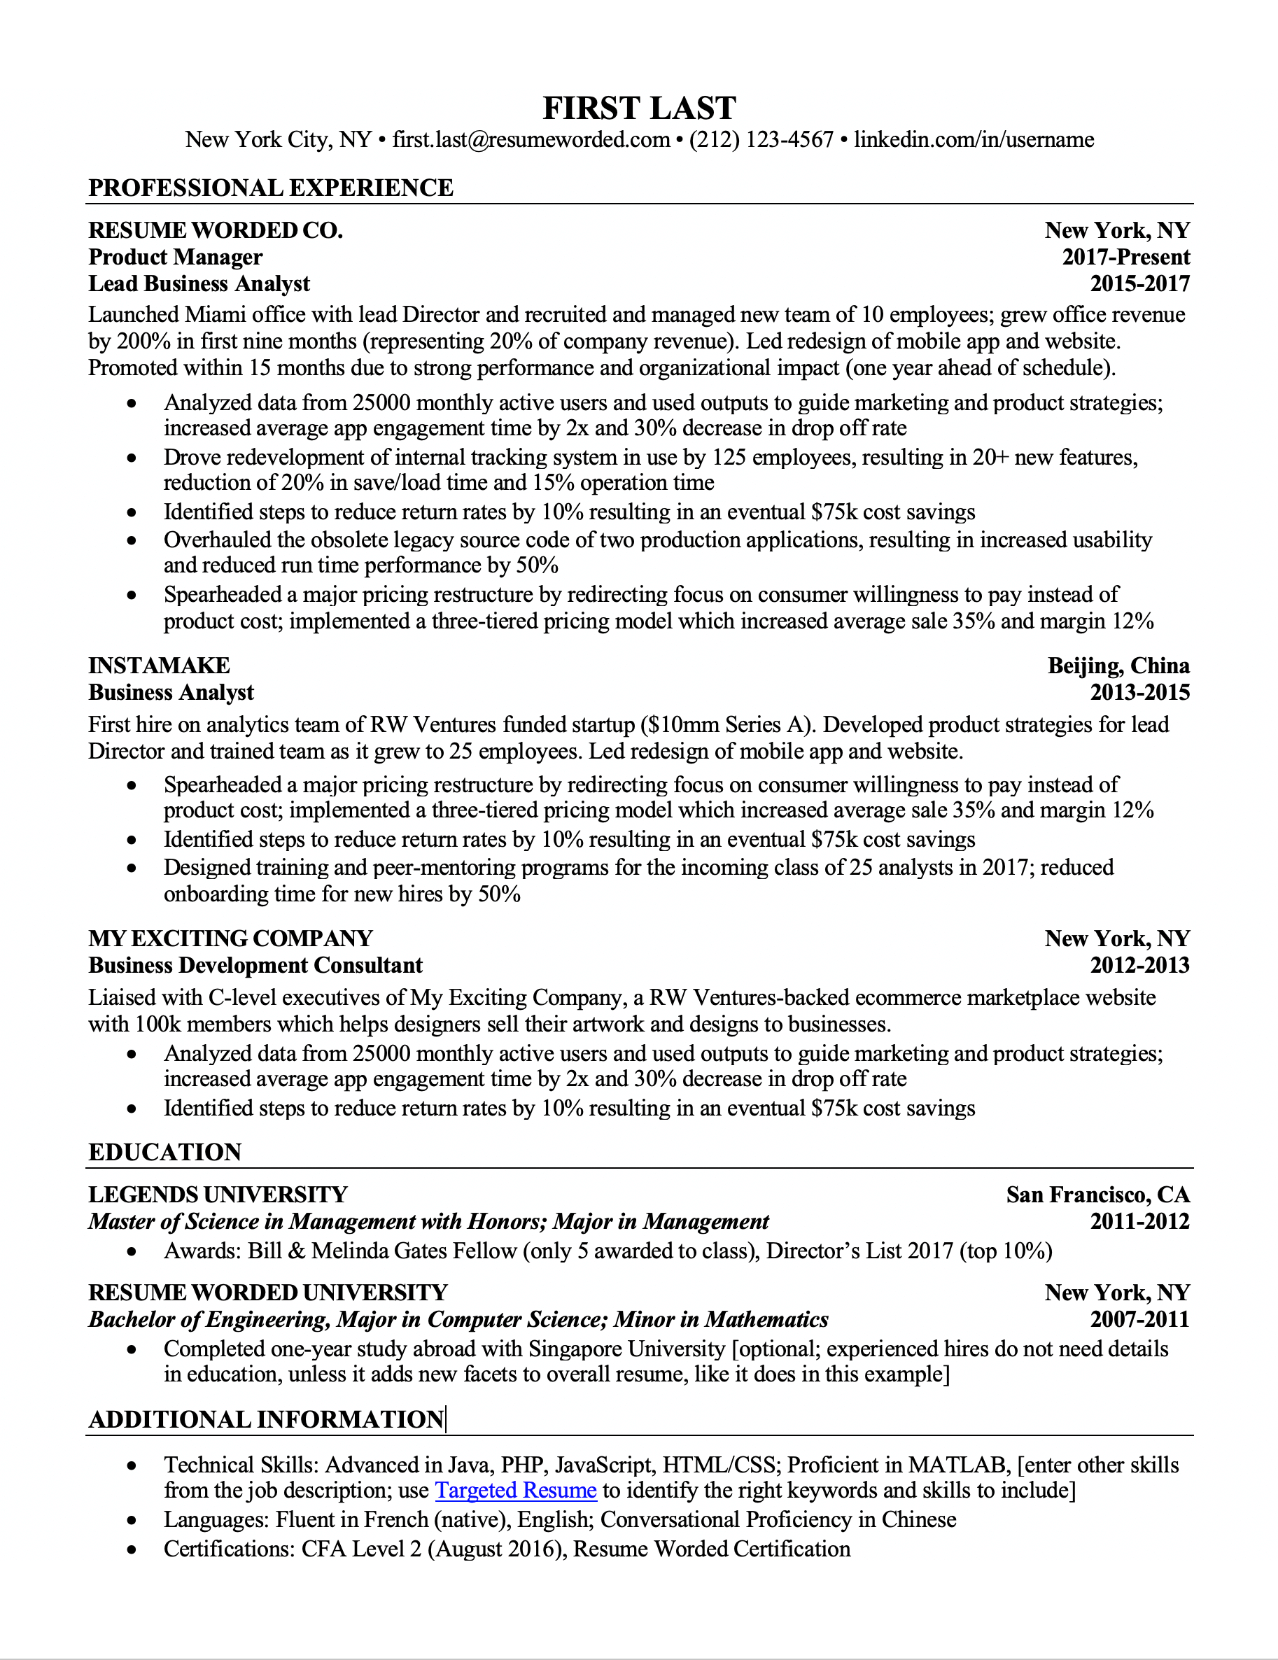 Sample resume template with responsibilities before bullet points